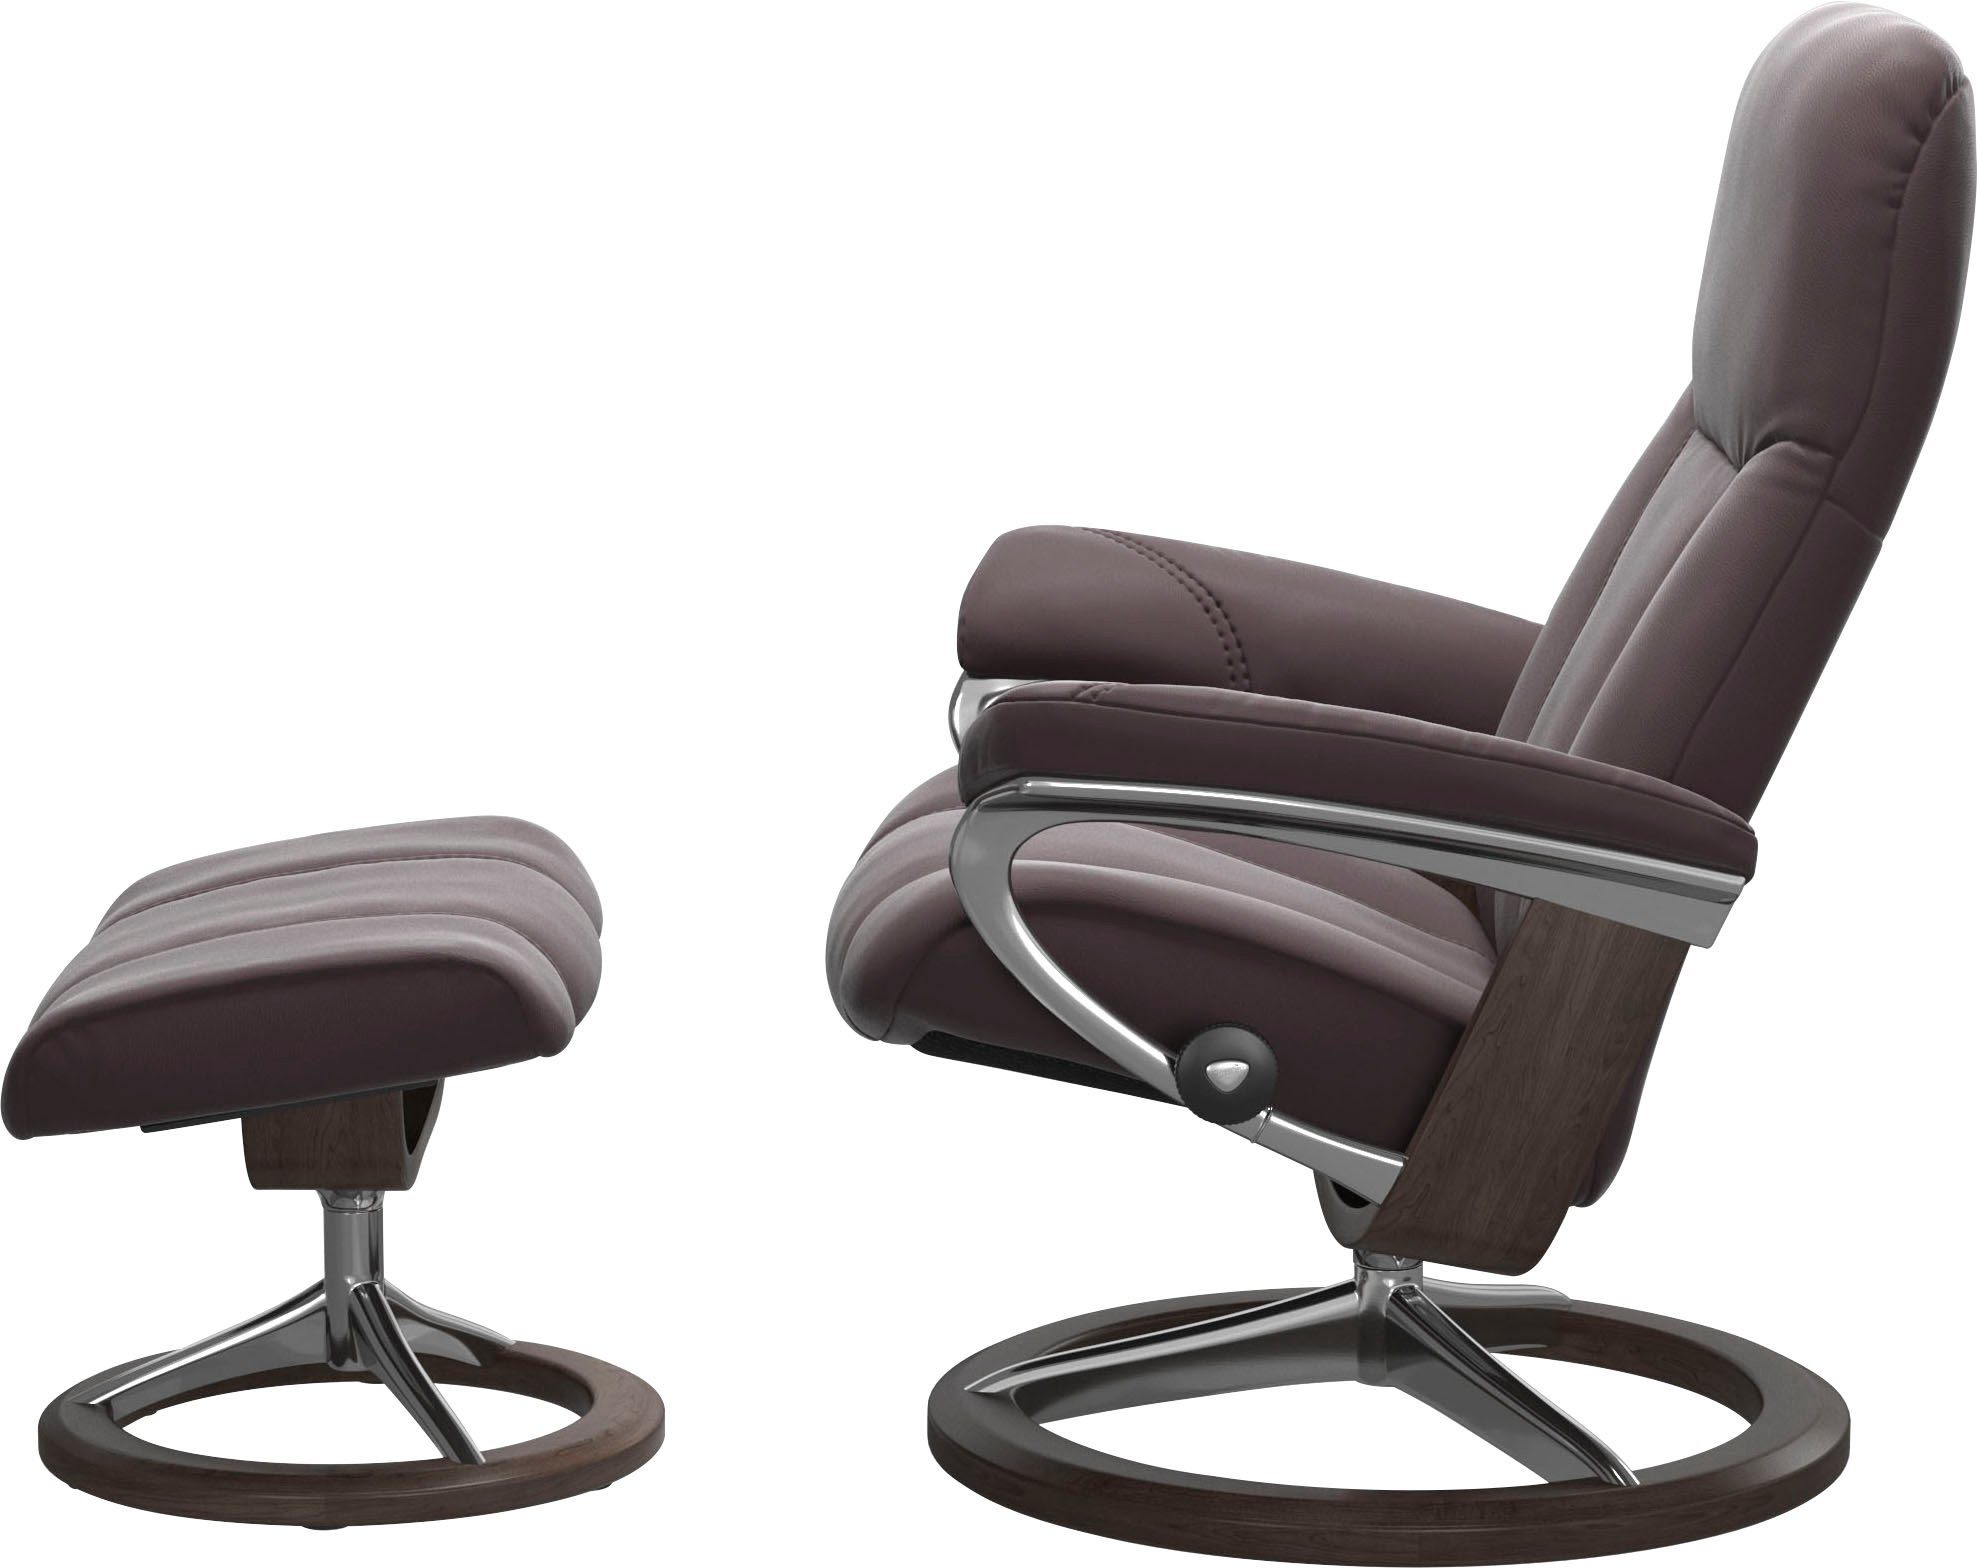 Größe Relaxsessel Base, Gestell S, Signature Wenge Consul, mit Stressless®